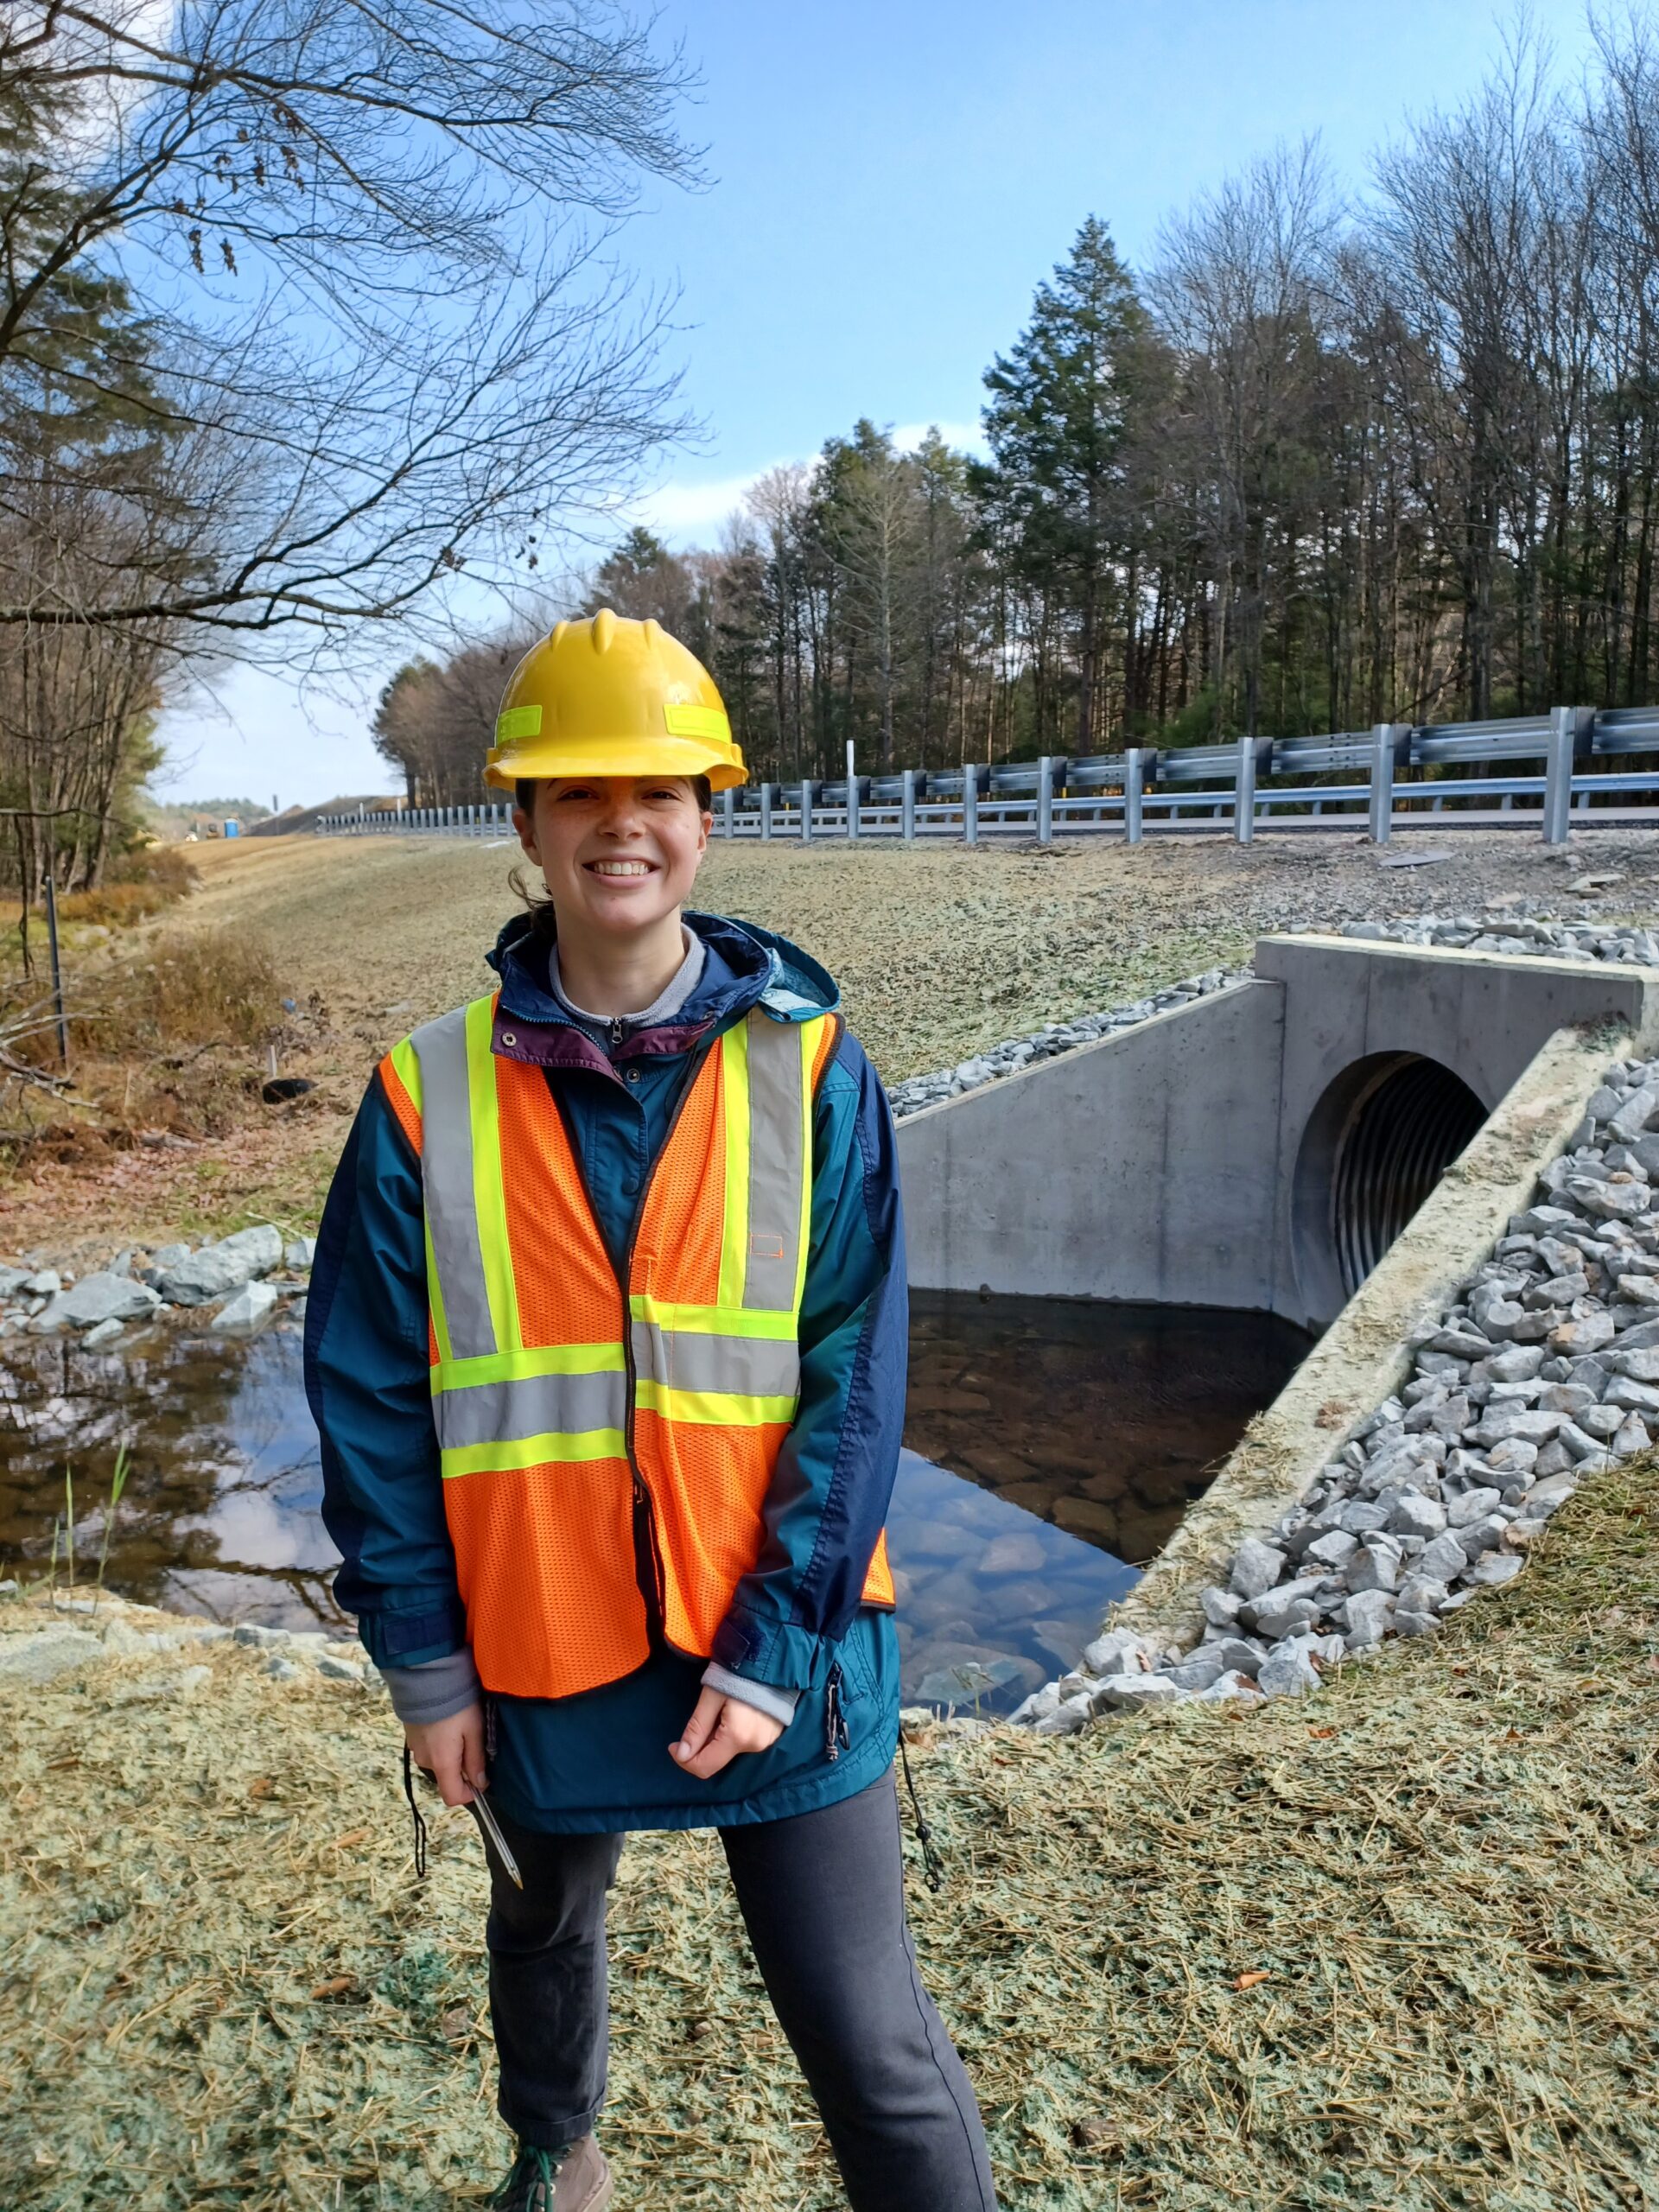 Resource Conservationist Ally poses next to State Route 84 with a hardhat and safety vest